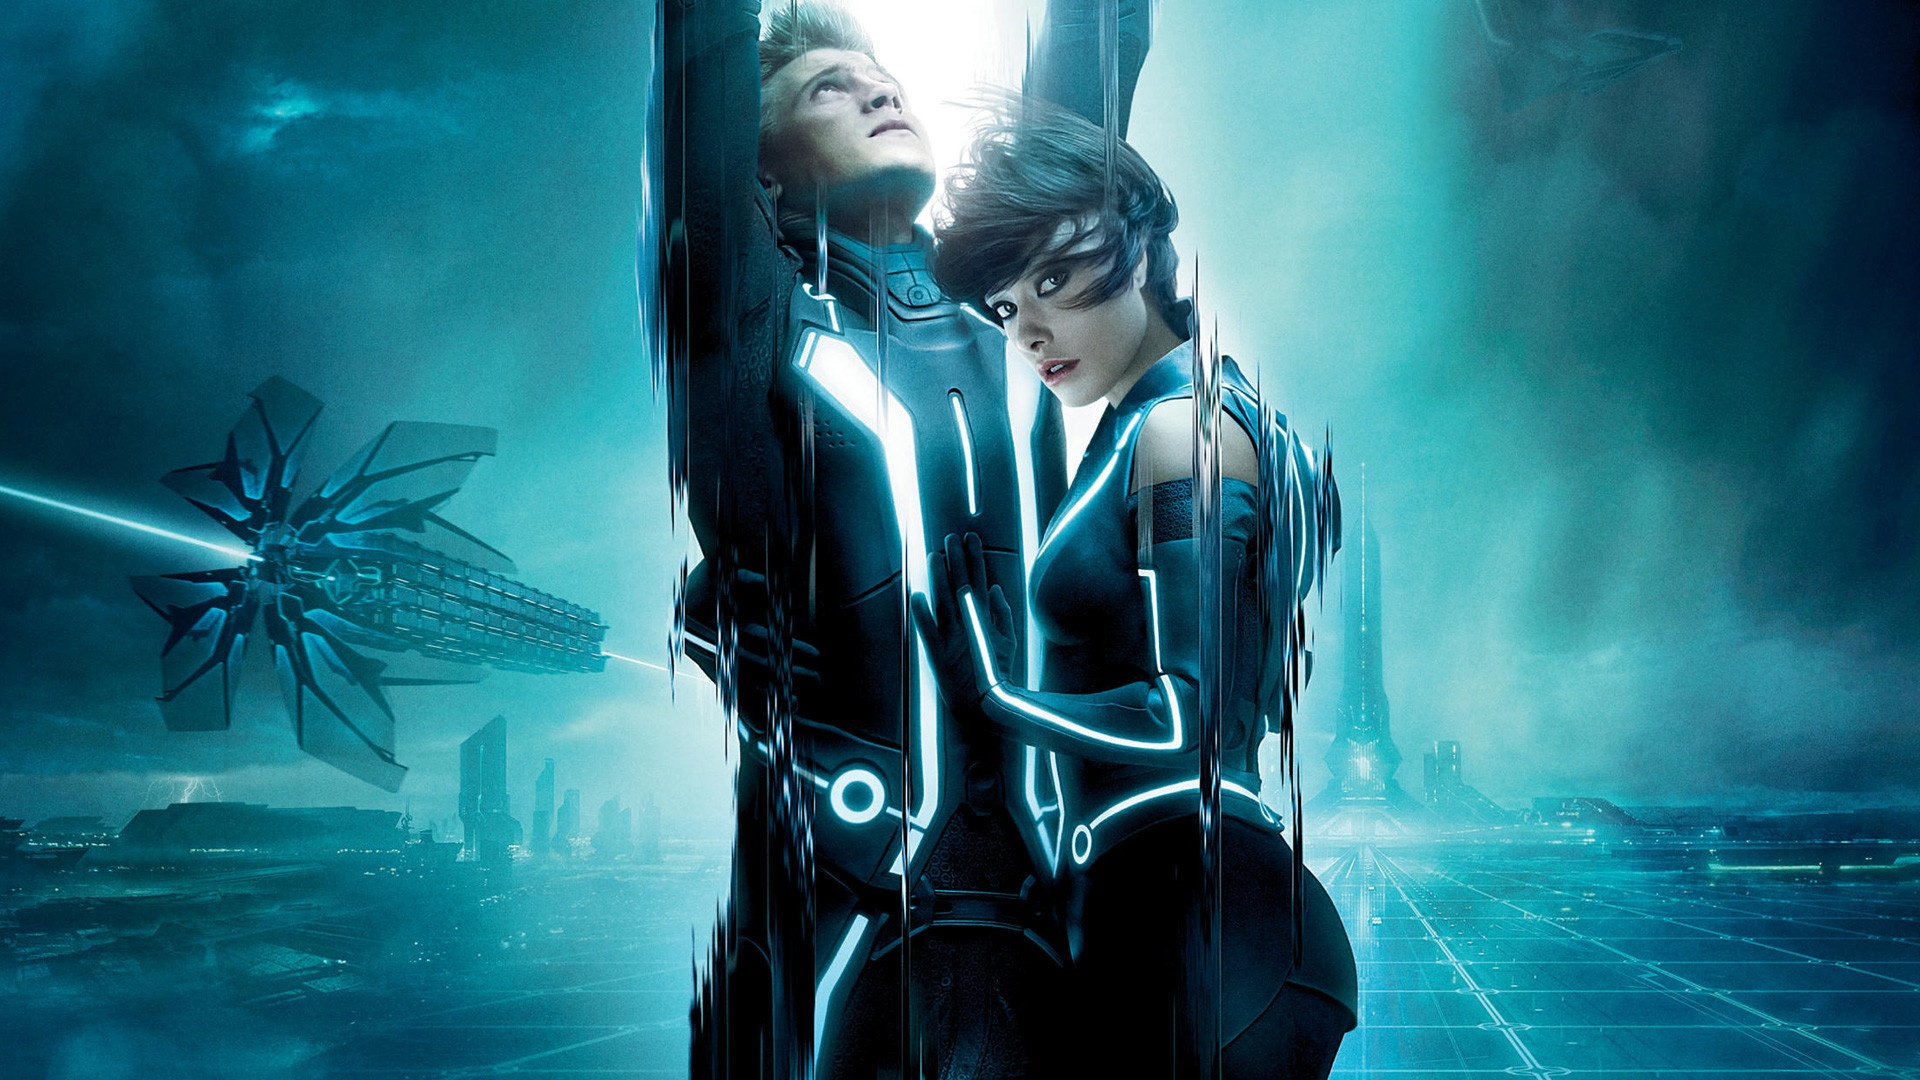 Tron Legacy 2010 Movie Wallpapers HD Wallpapers 1920x1080